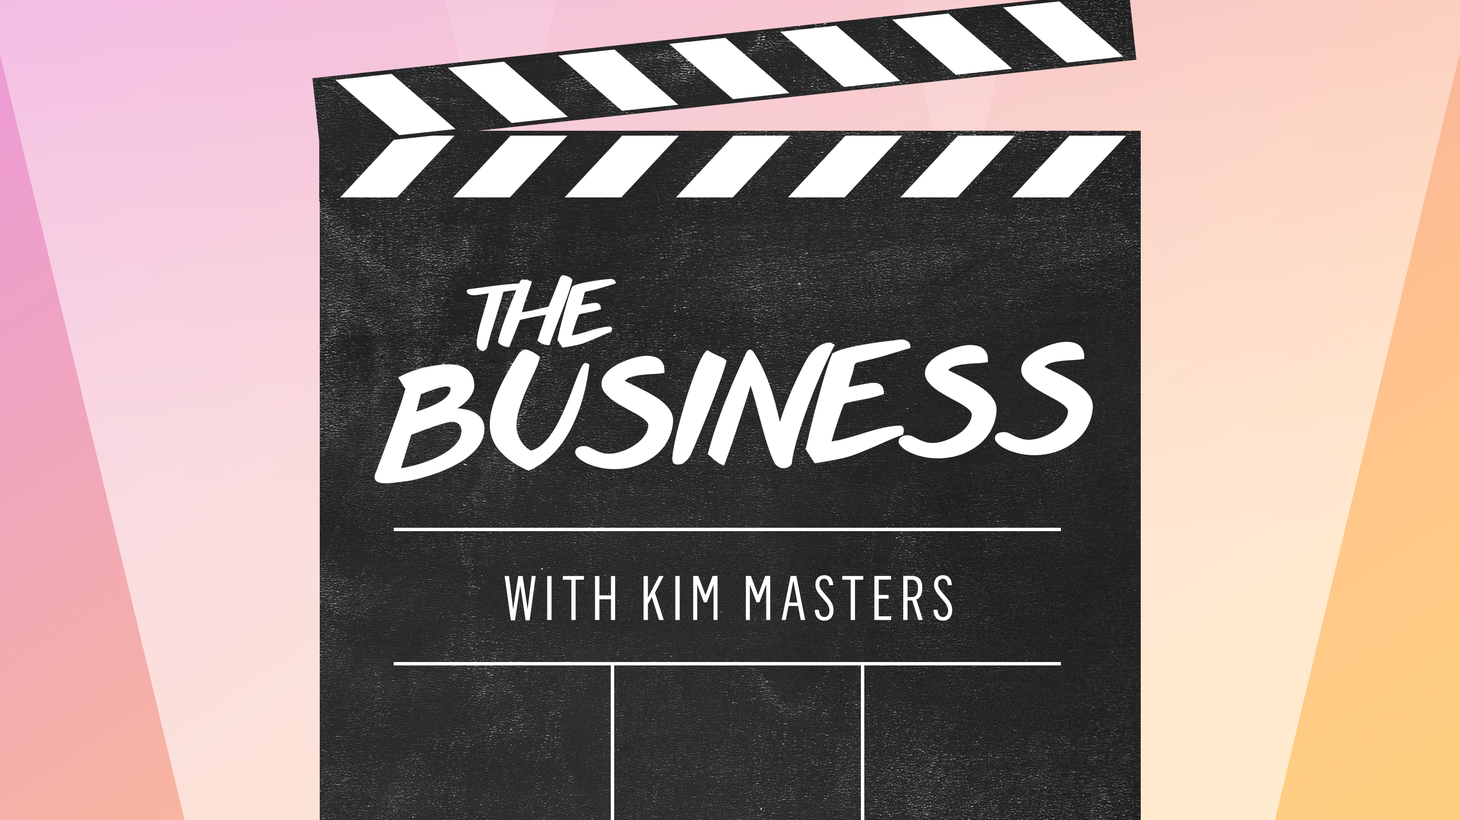 This week, on The Business, we attempt to answer the age-old question: What exactly does a producer do?  Larry Turman, the man behind such films as -The Graduate,- will explain it all for you.  Plus, the TV networks trot out their new shows for the entertainment press, with hilarious results.